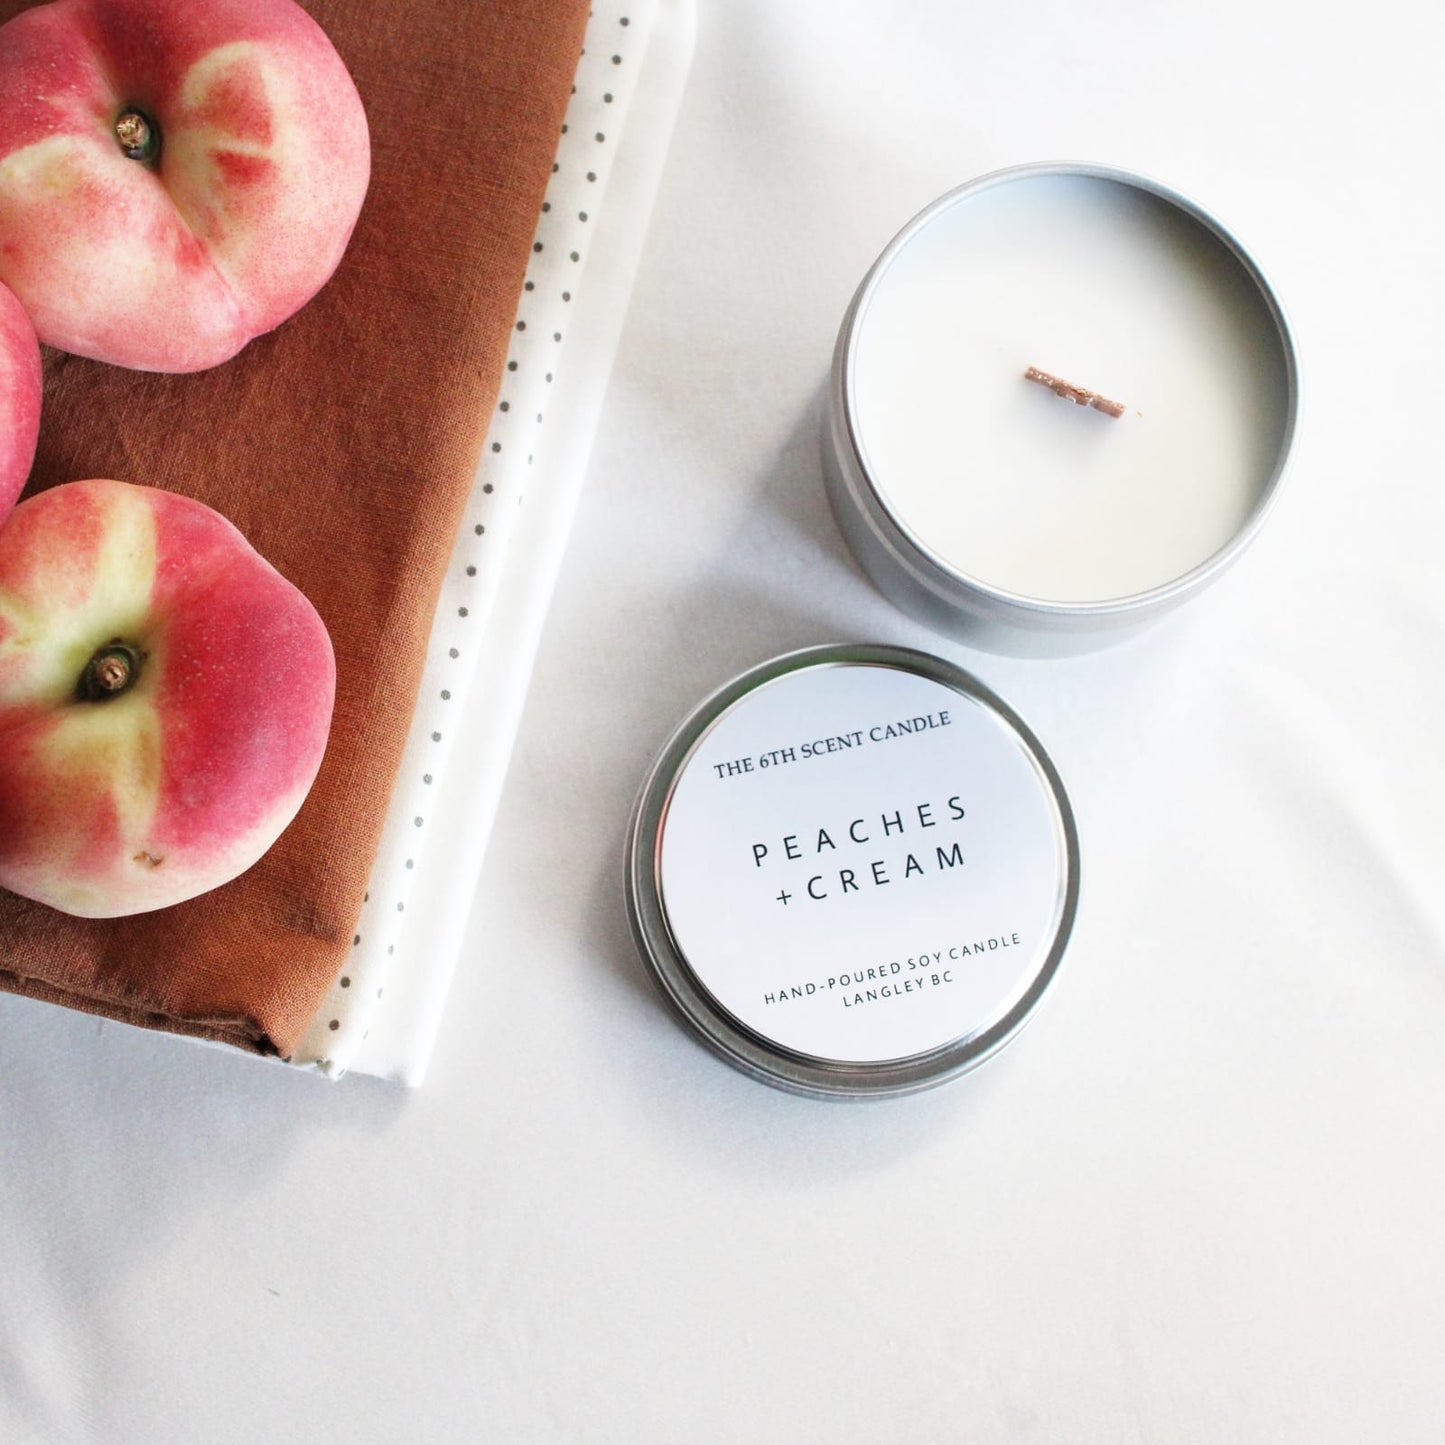 PEACHES + CREAM SOY CANDLE